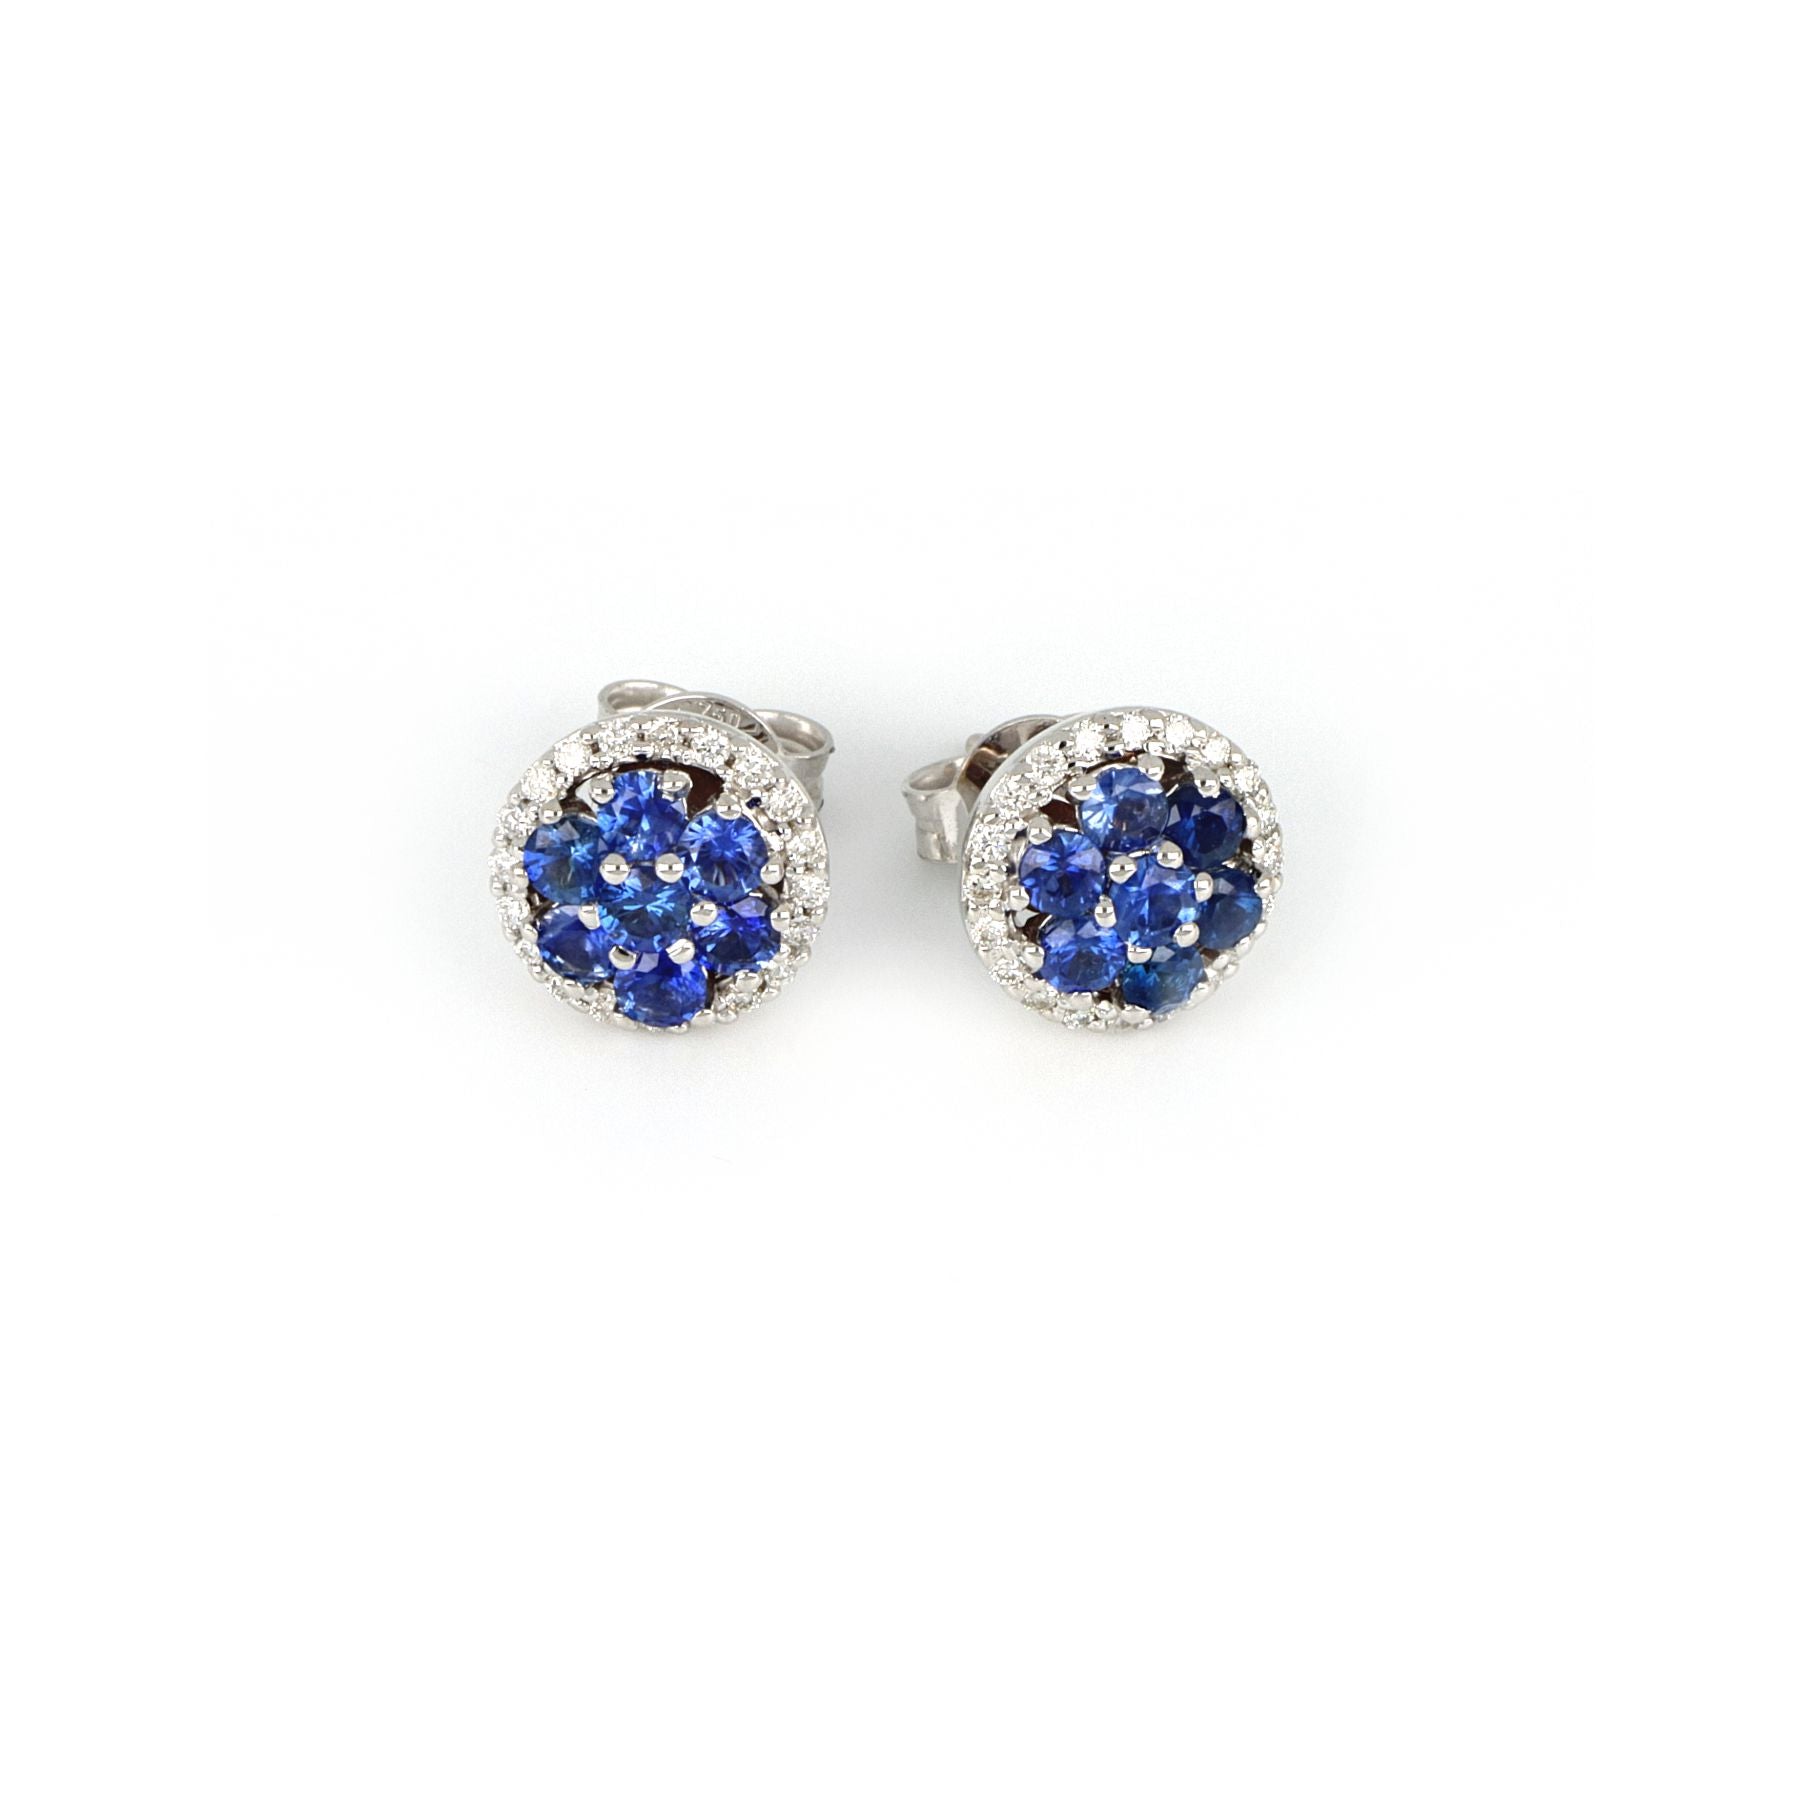 Video White Gold Earrings With Sapphires And Diamonds